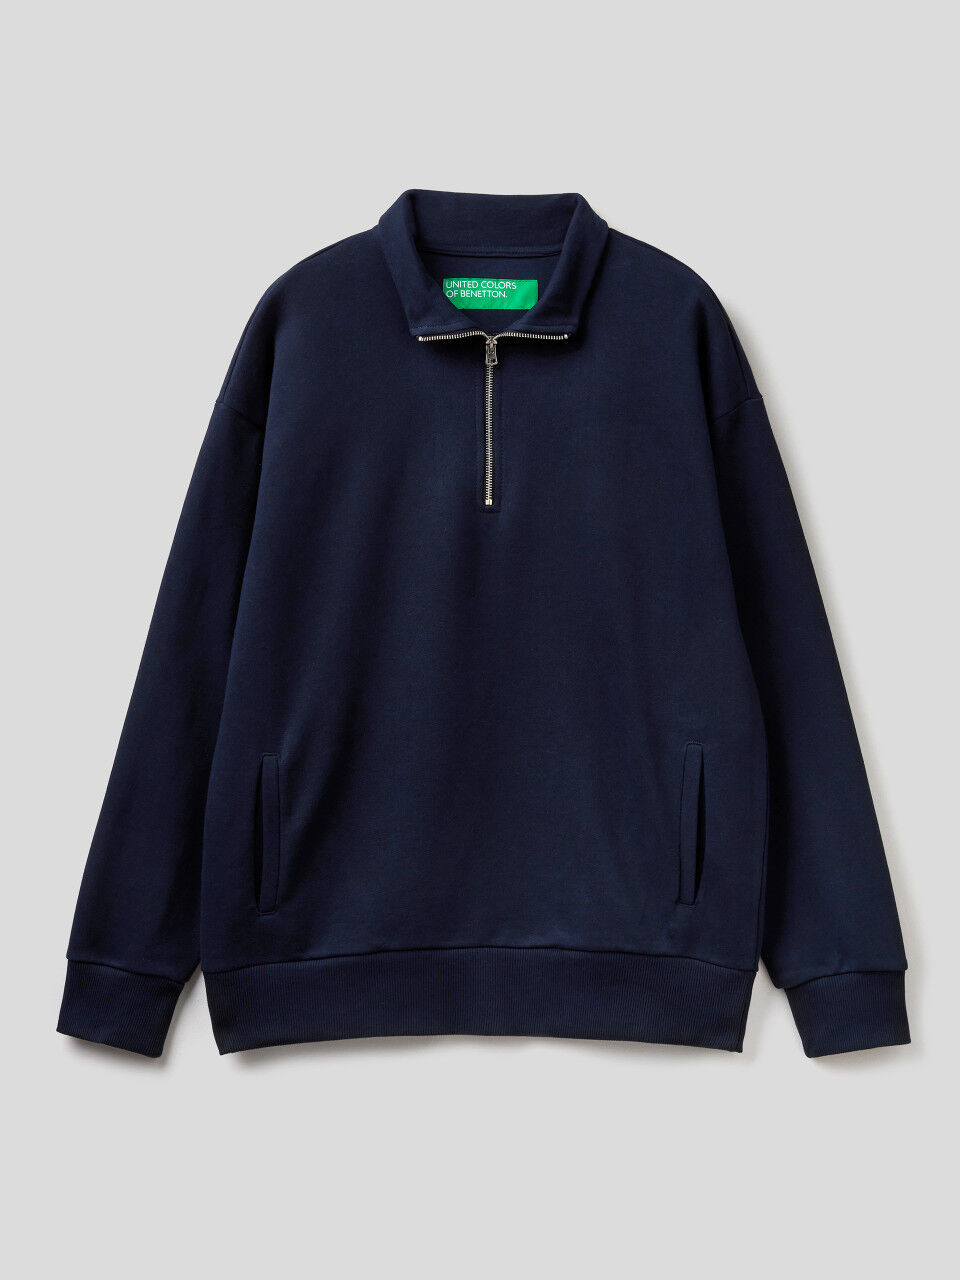 United Colors of Benetton Sweater L/S Sudadera para Hombre 